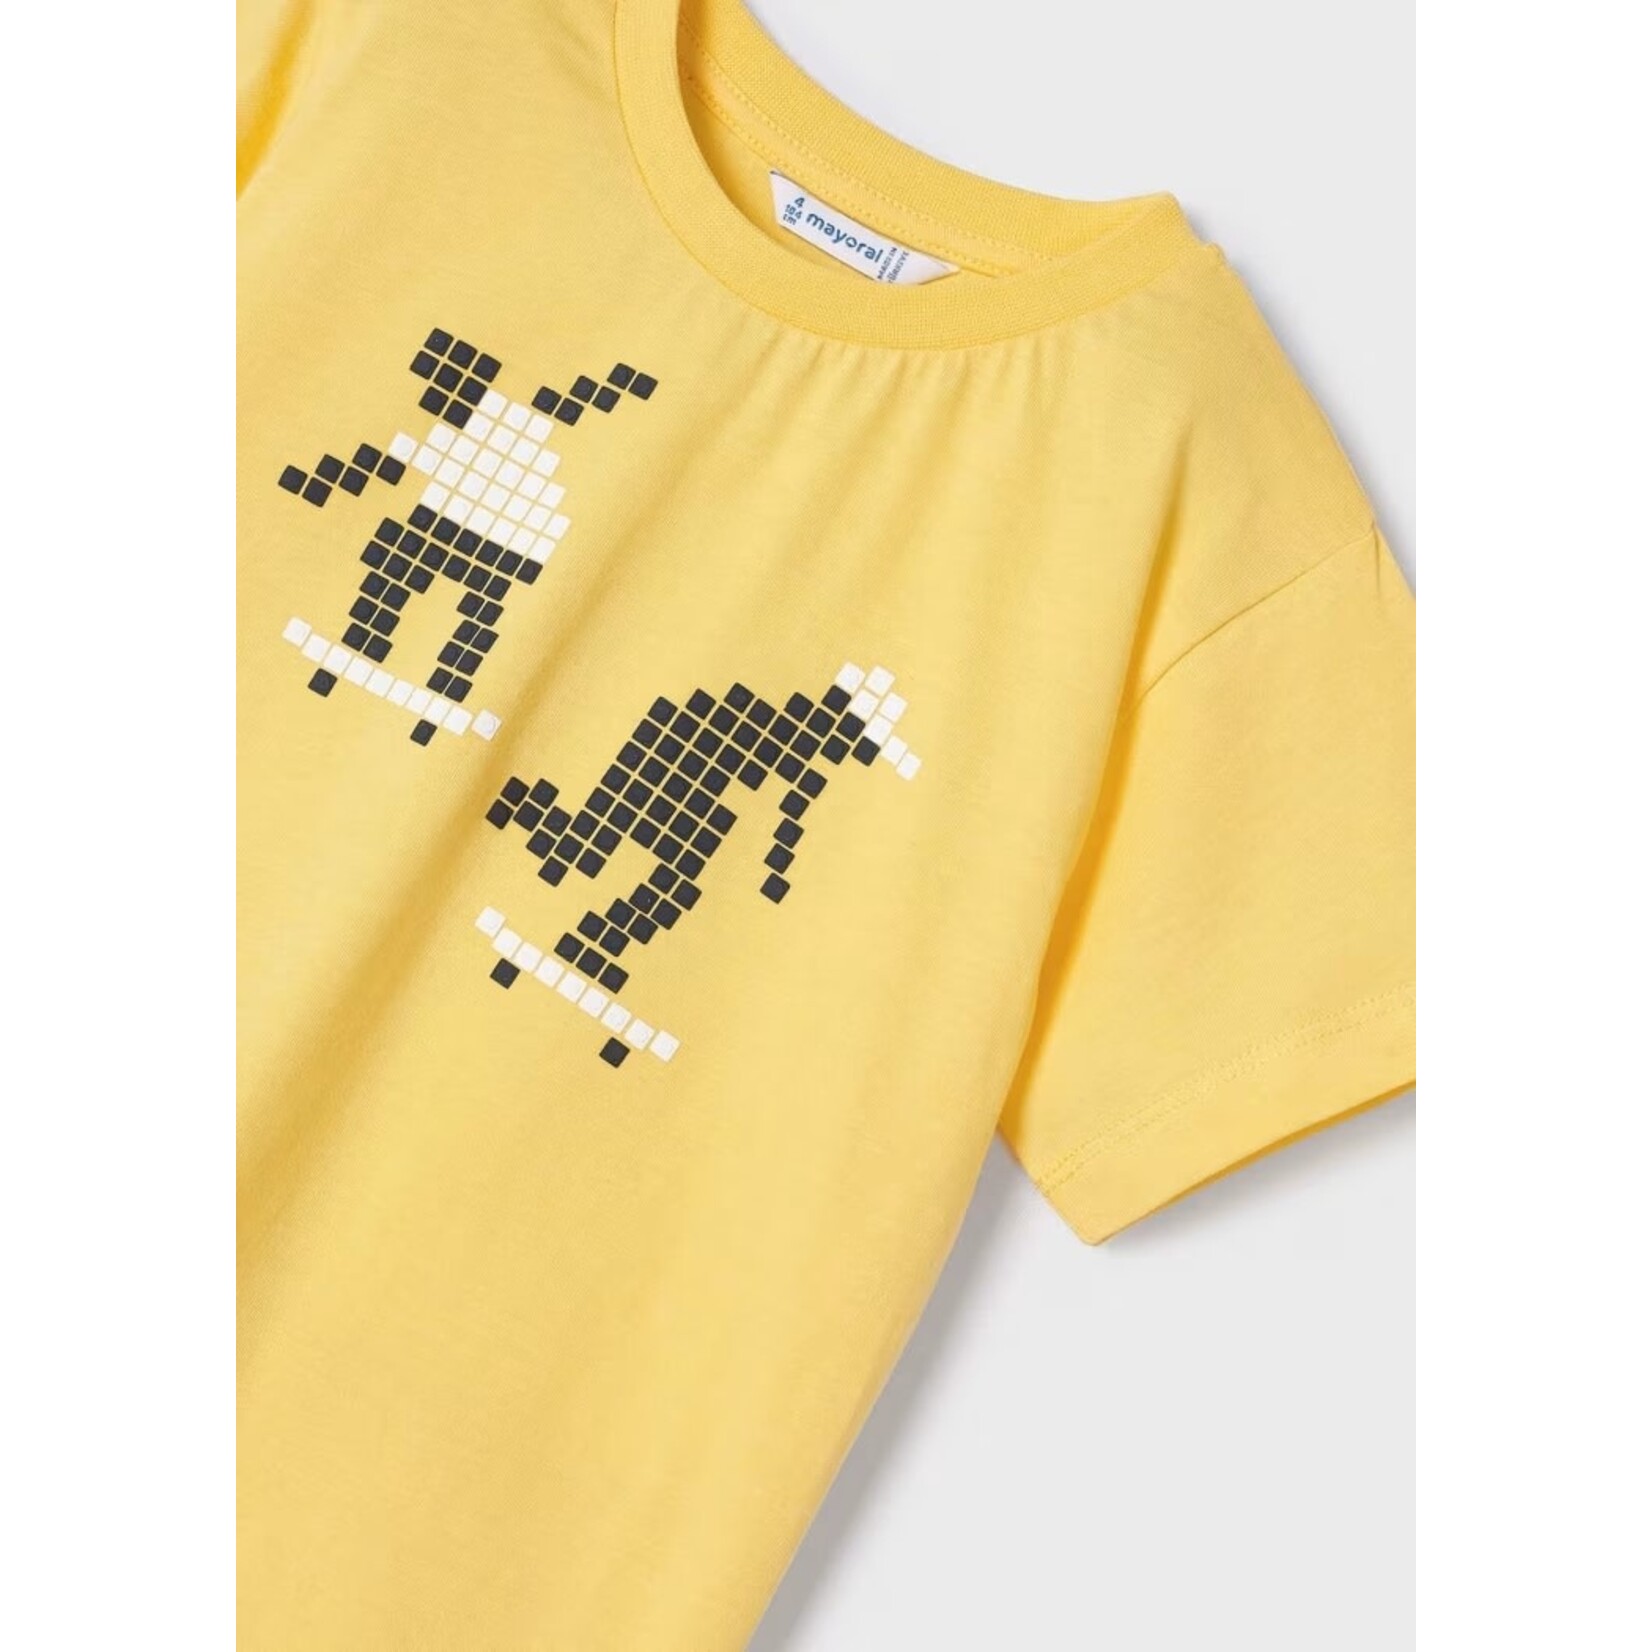 Mayoral MAYORAL -  Yellow Short-Sleeve T-Shirt with Geometric Skateboarder Print